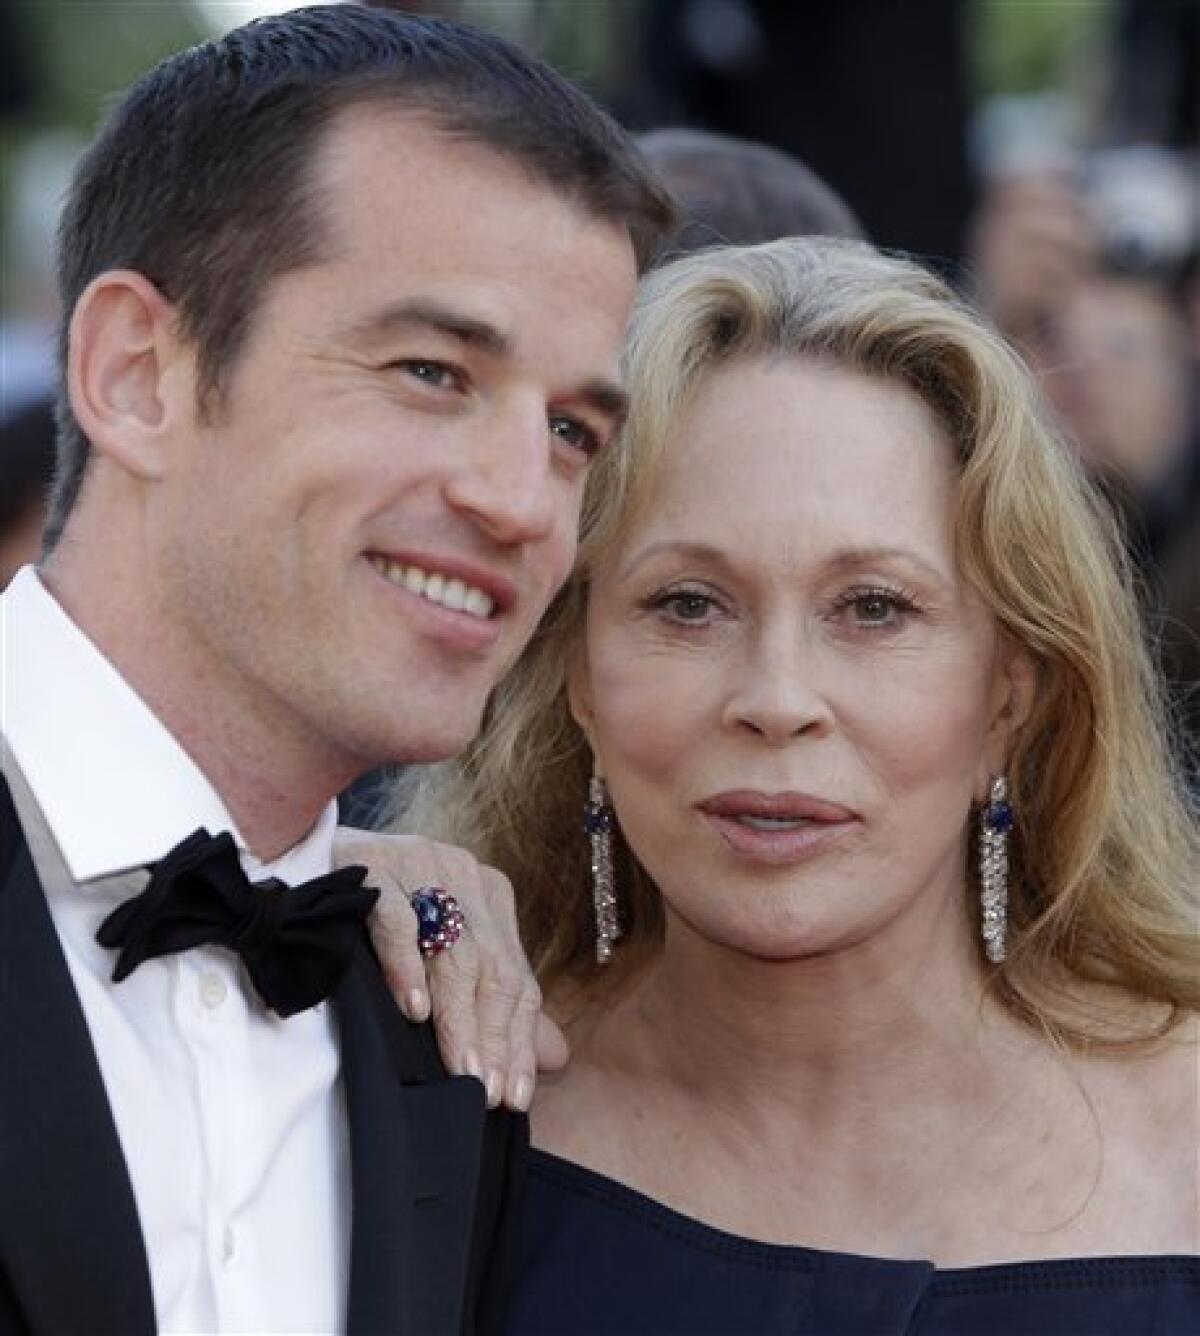 In this May 20, 2011 photo, actress Faye Dunaway, right, and her son Liam O'Neill arrive for the screening of This Must be the Place at the 64th international film festival, in Cannes, southern France. A New York landlord is suing Dunaway, claiming the actress' rent-stabilized apartment is not her primary residence. The New York Times says the suit was filed Tuesday, Aug. 2, 2011. The suit also names O'Neill as a subtenant of the Manhattan apartment. Dunaway and her son didn't return calls seeking comment. (AP Photo/Lionel Cironneau)